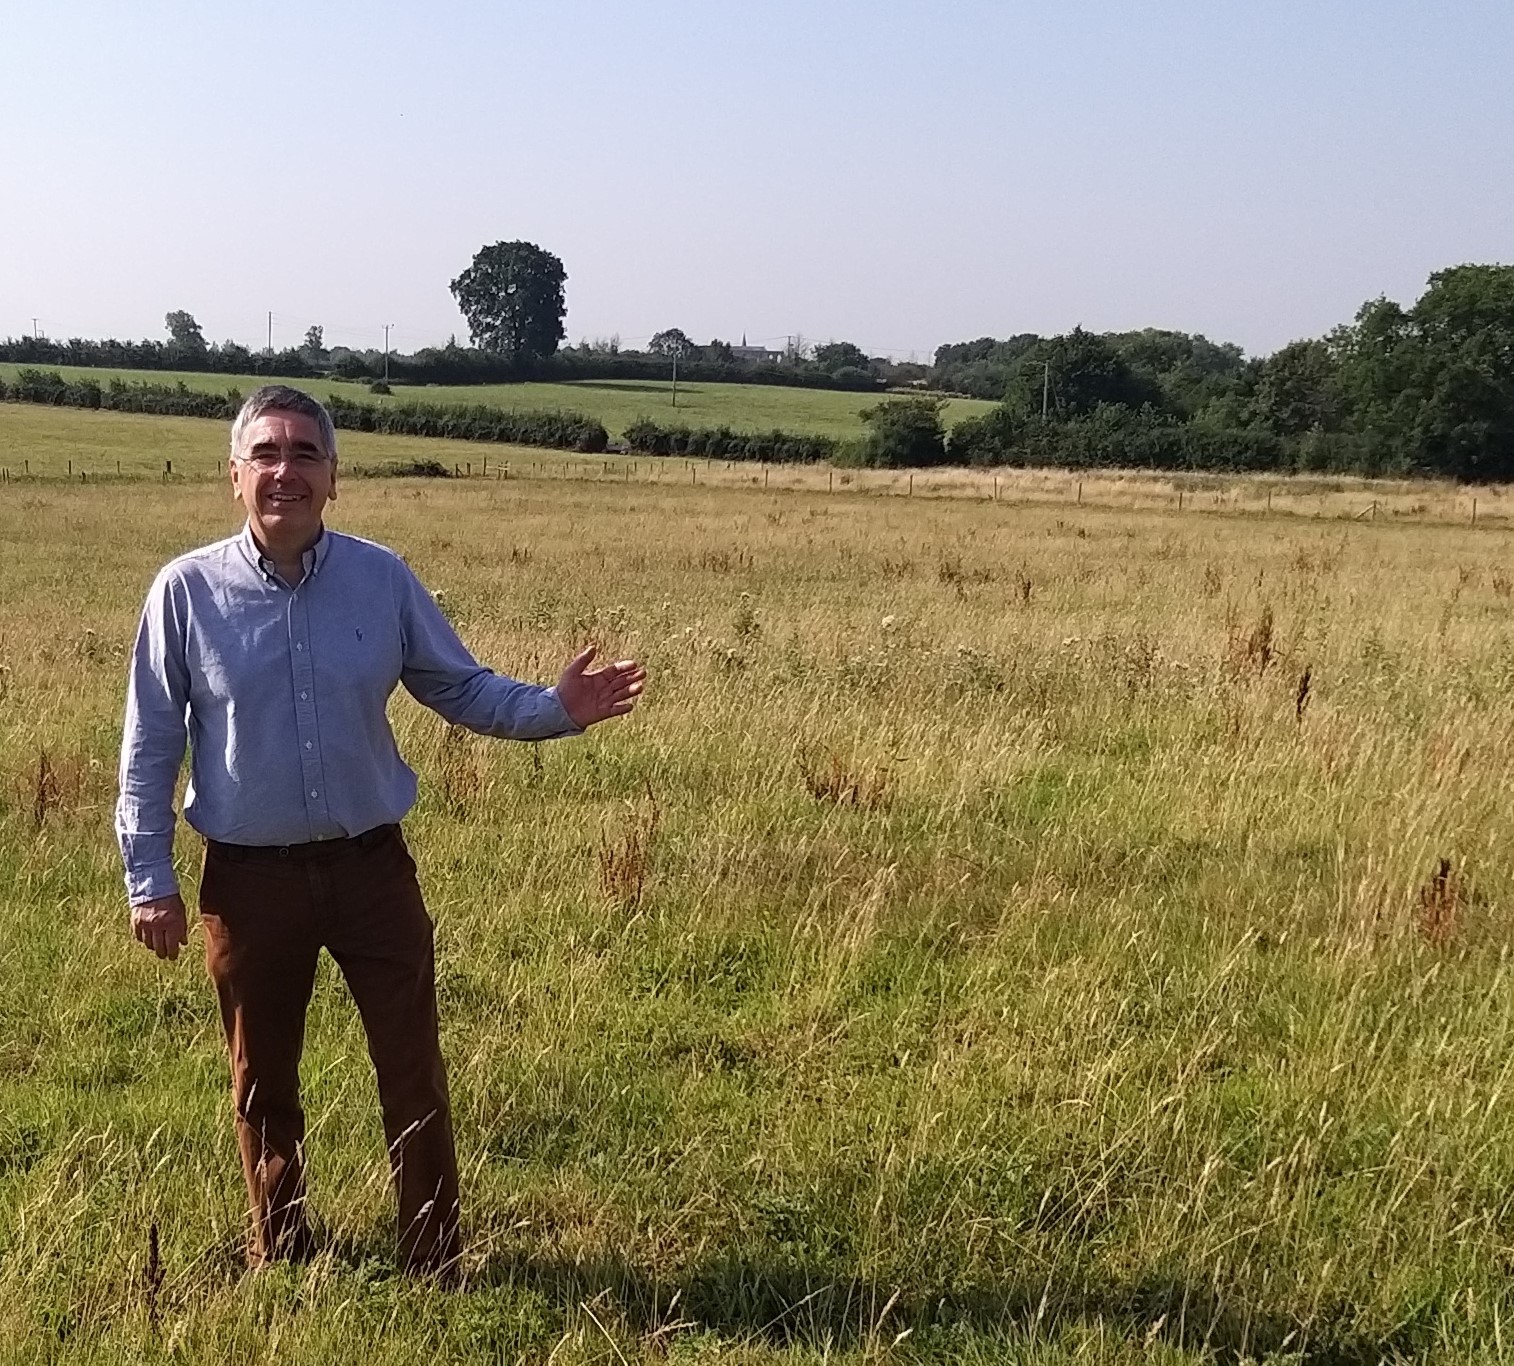 Mayor of Malmesbury, Campbell Ritchie, highlighting the view towards Malmesbury Abbey at the Filands site that was given planning permission in May in breach of the Malmesbury Neighbourhood Plan 